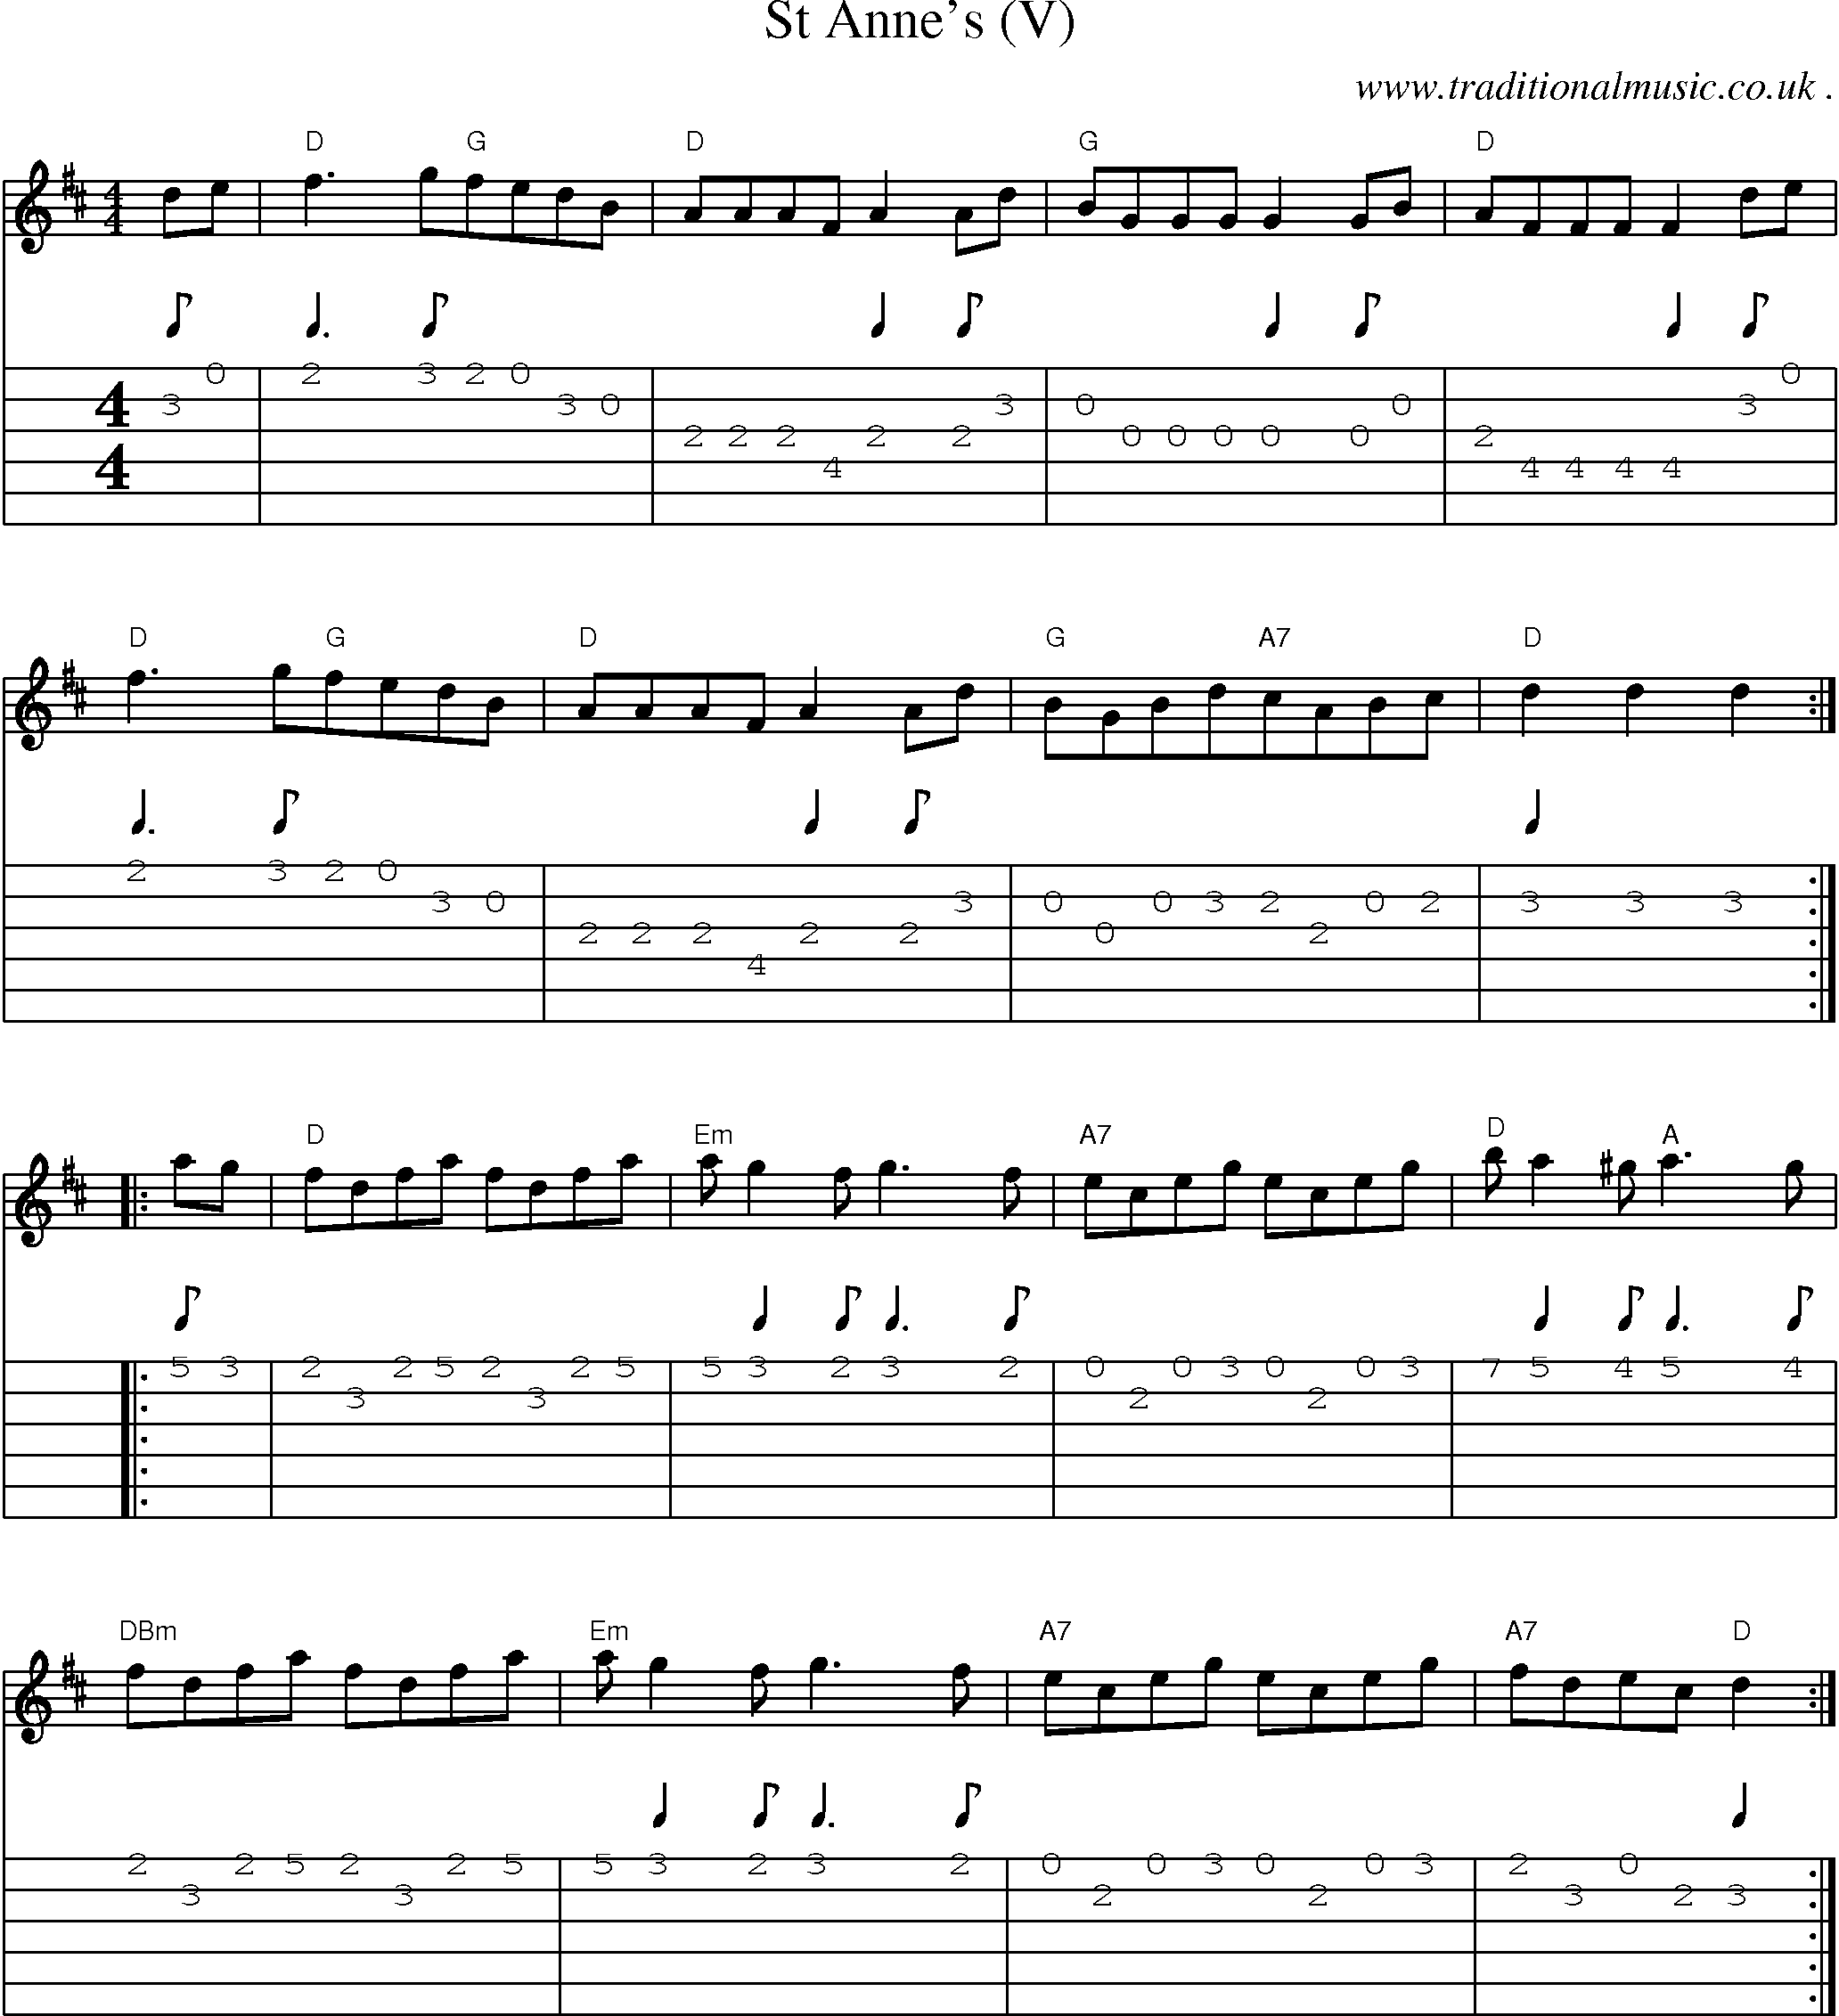 Sheet-Music and Guitar Tabs for St Annes (v)